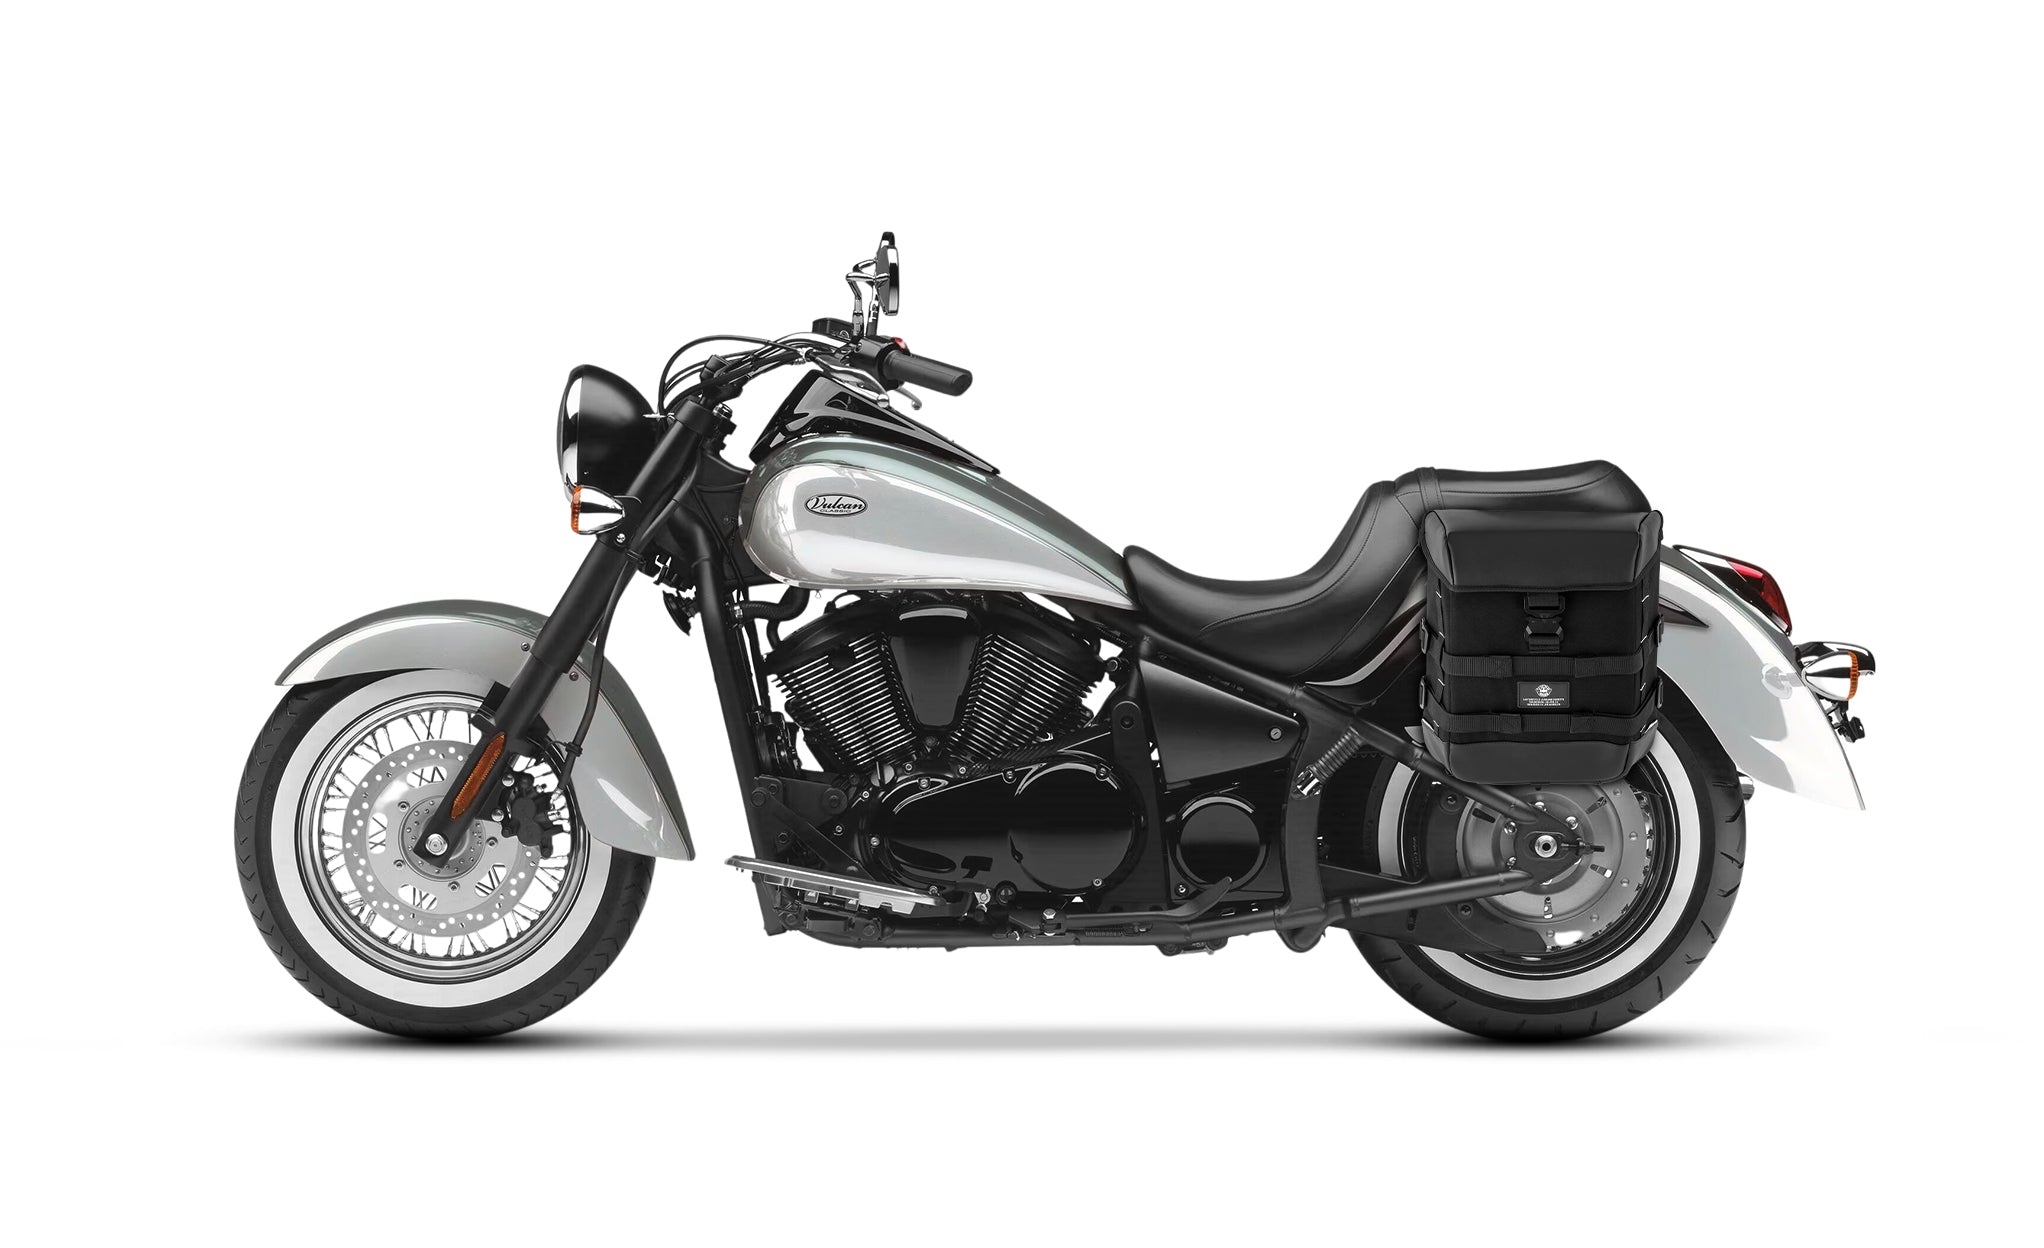 15L - Incognito Quick-Mount Medium Kawasaki Vulcan 900 Classic VN900 Solo Saddlebag (Left Only) @expand